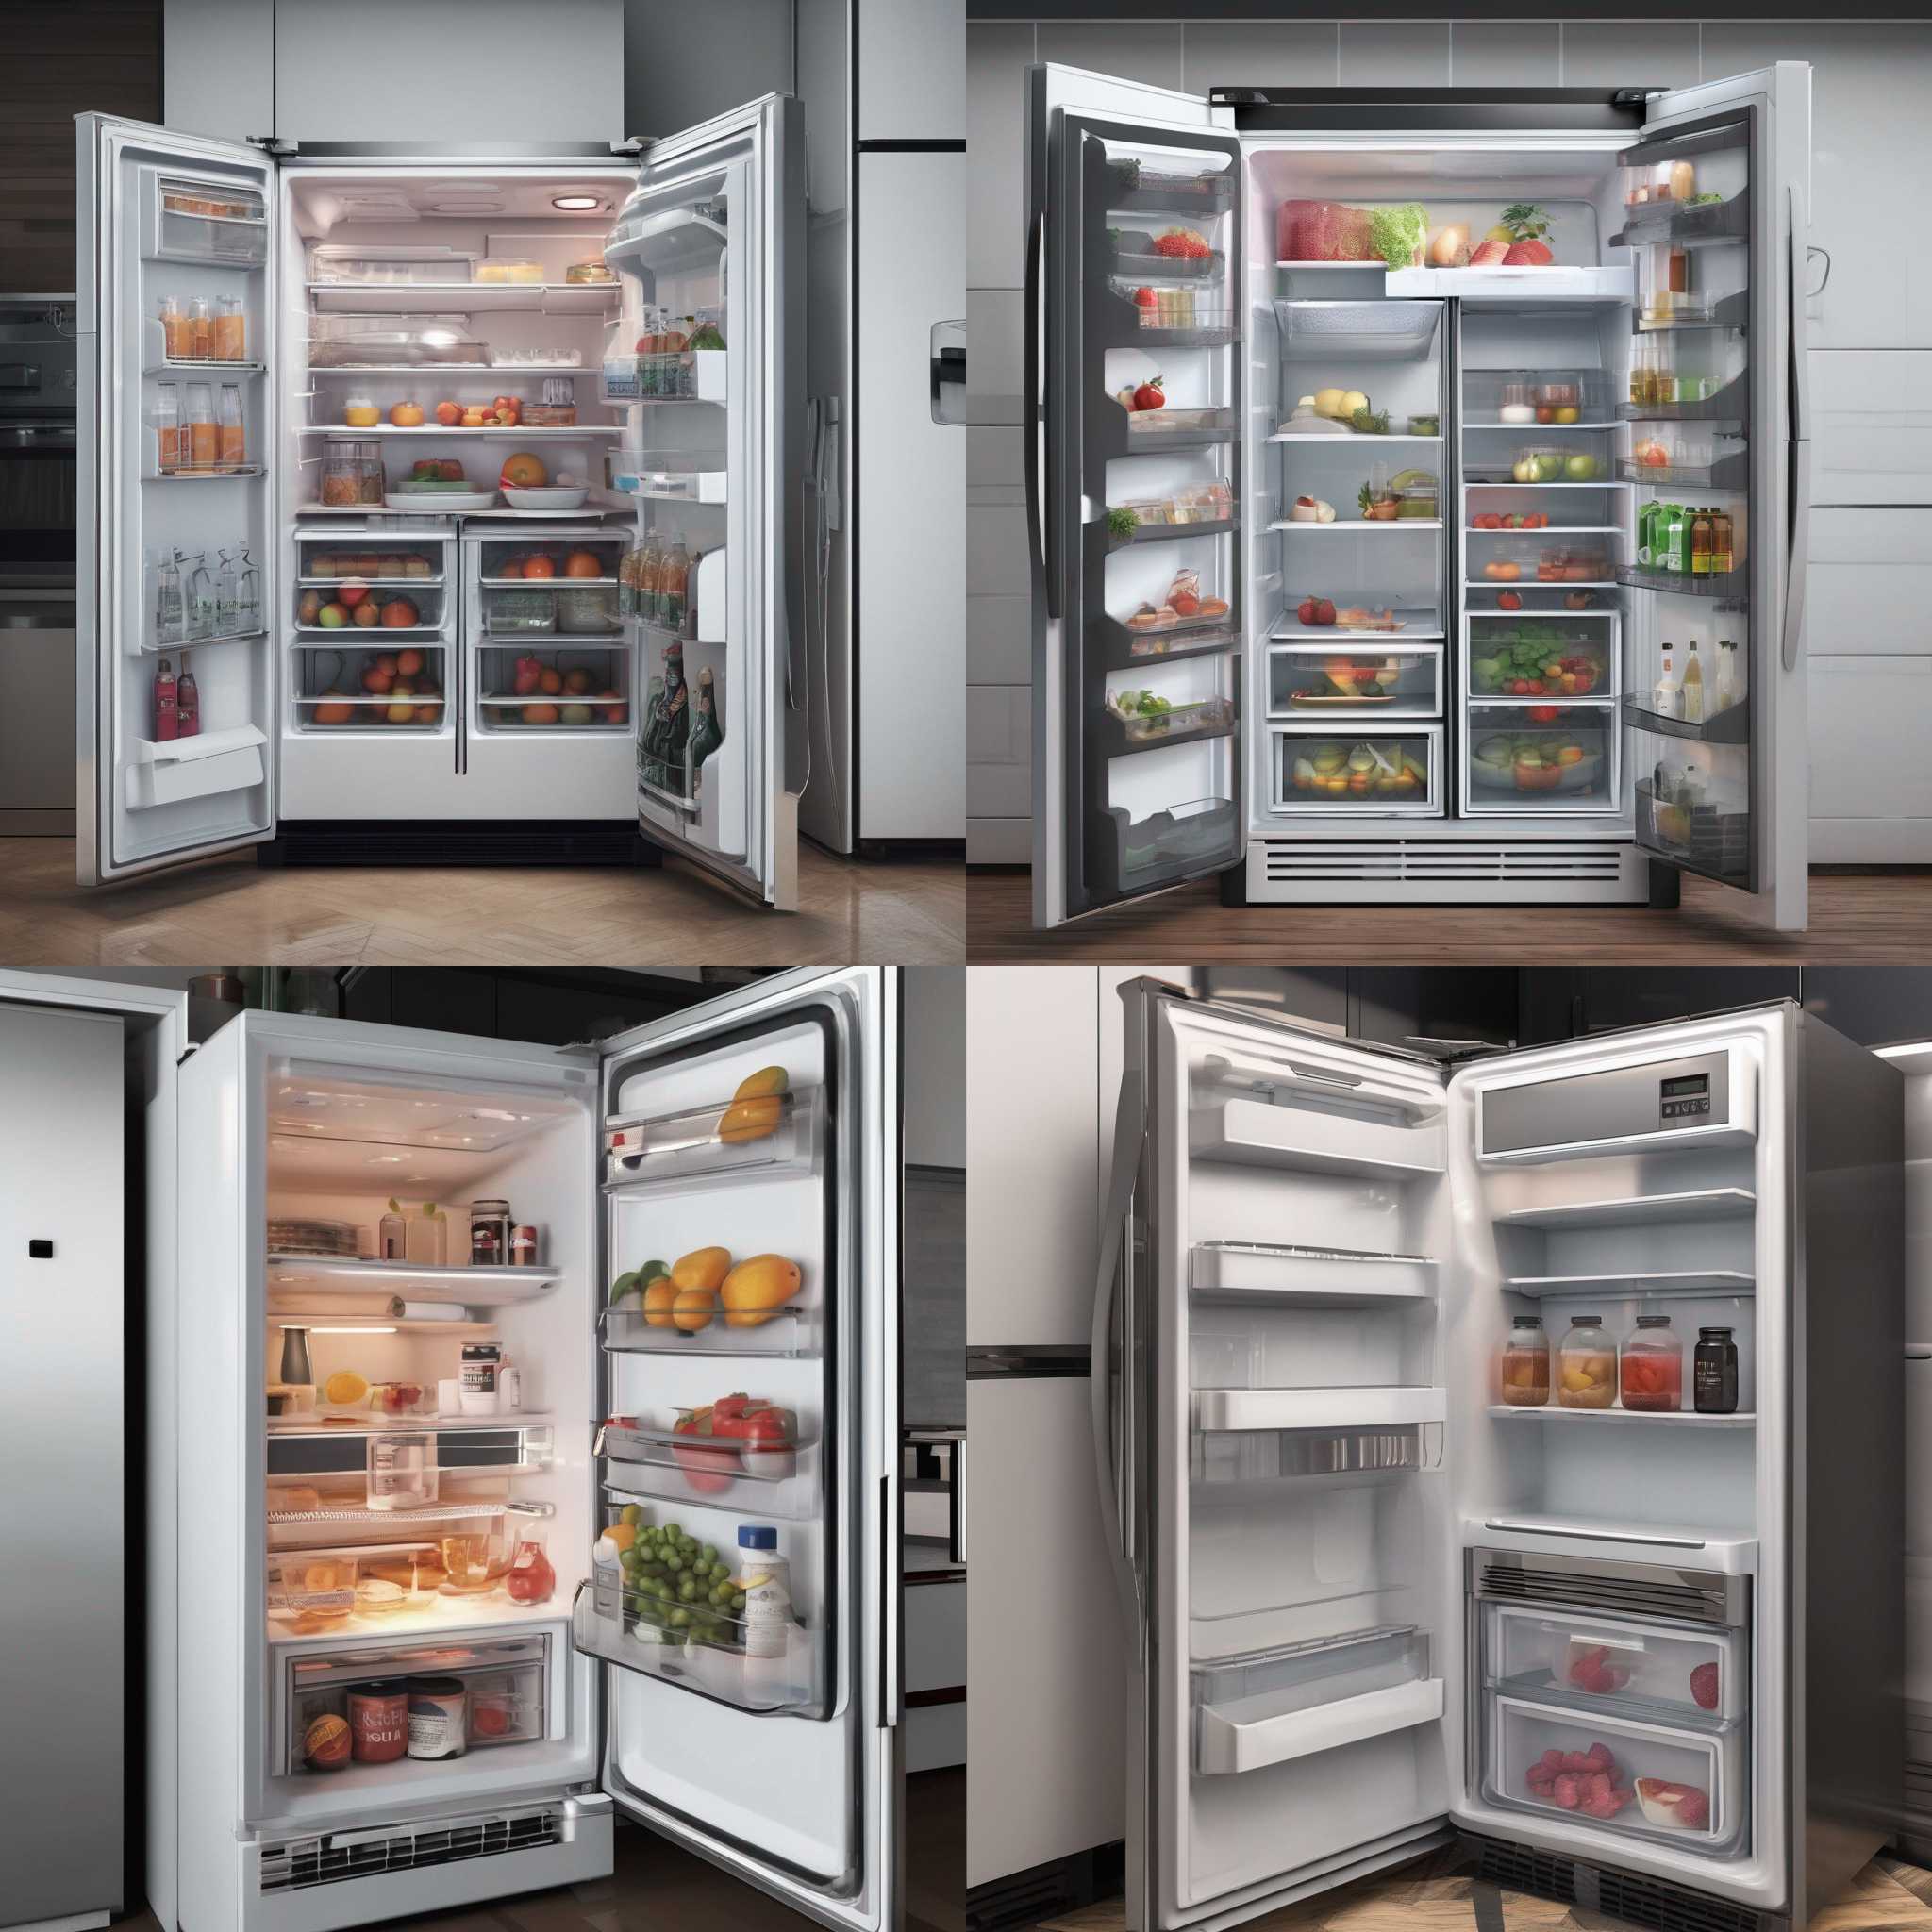 An open fridge connected to electricity